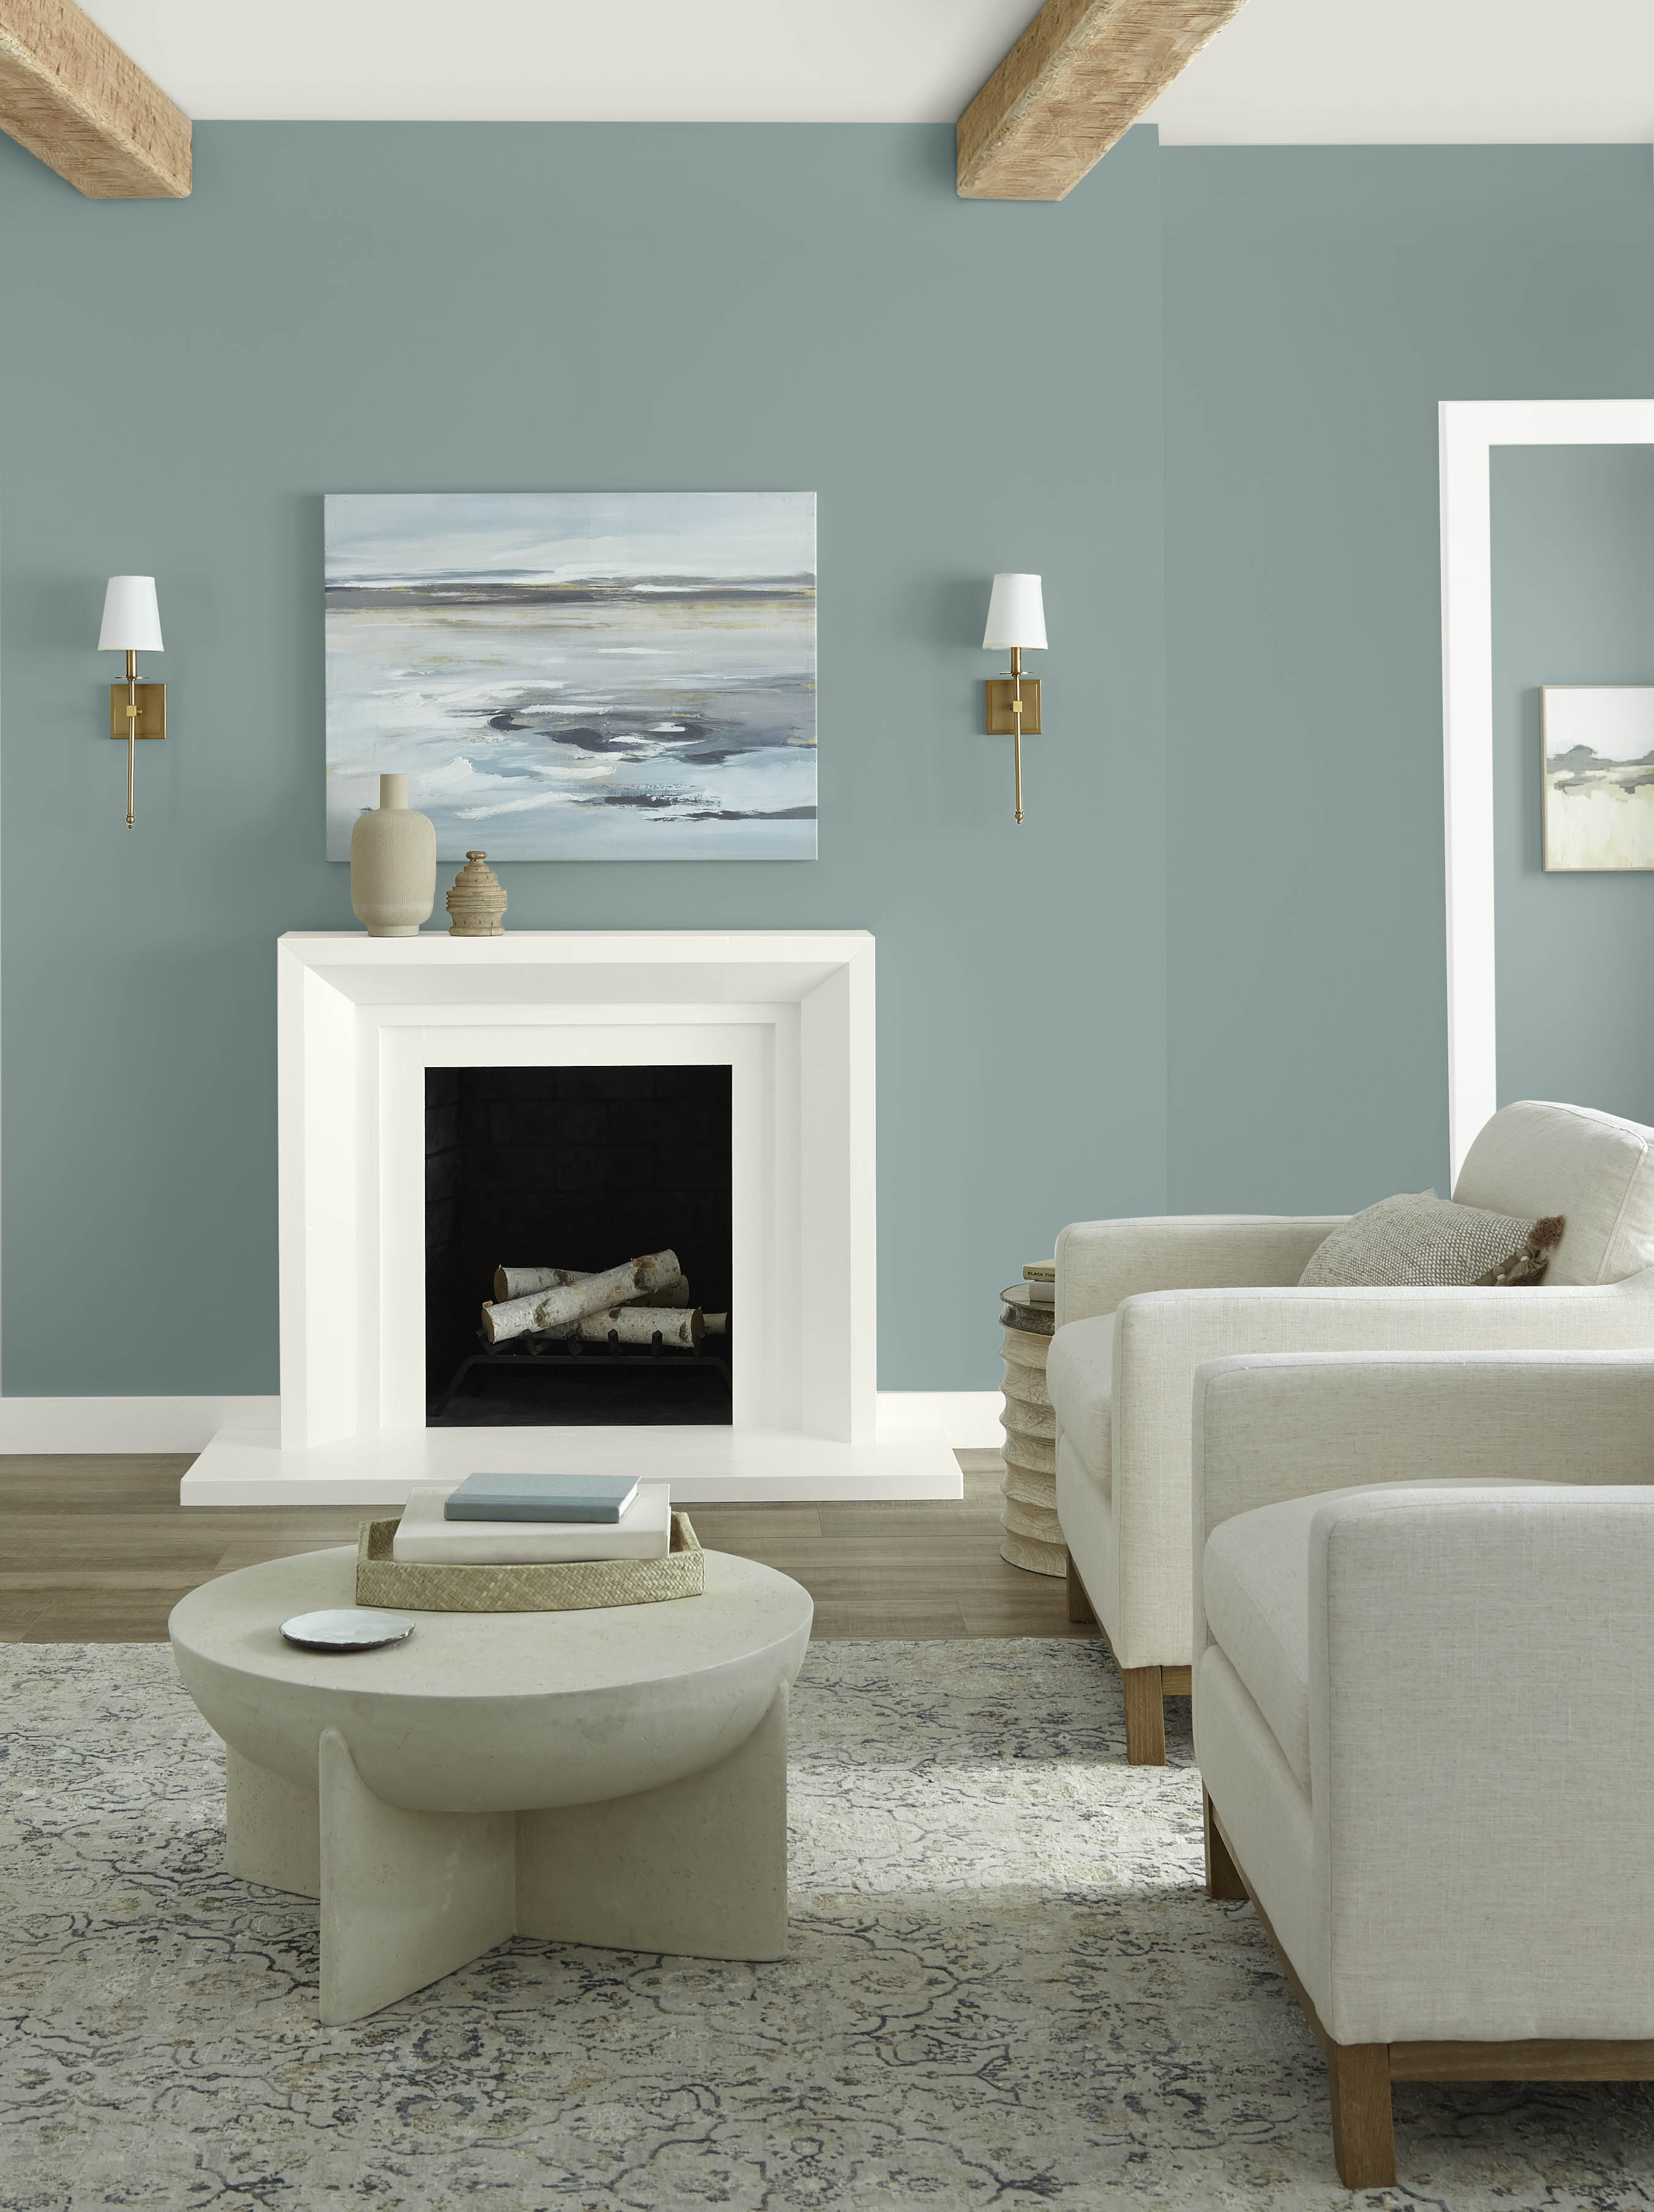 A living room with walls painted in a dusty blue green colour and white trim, ceiling, and fireplace